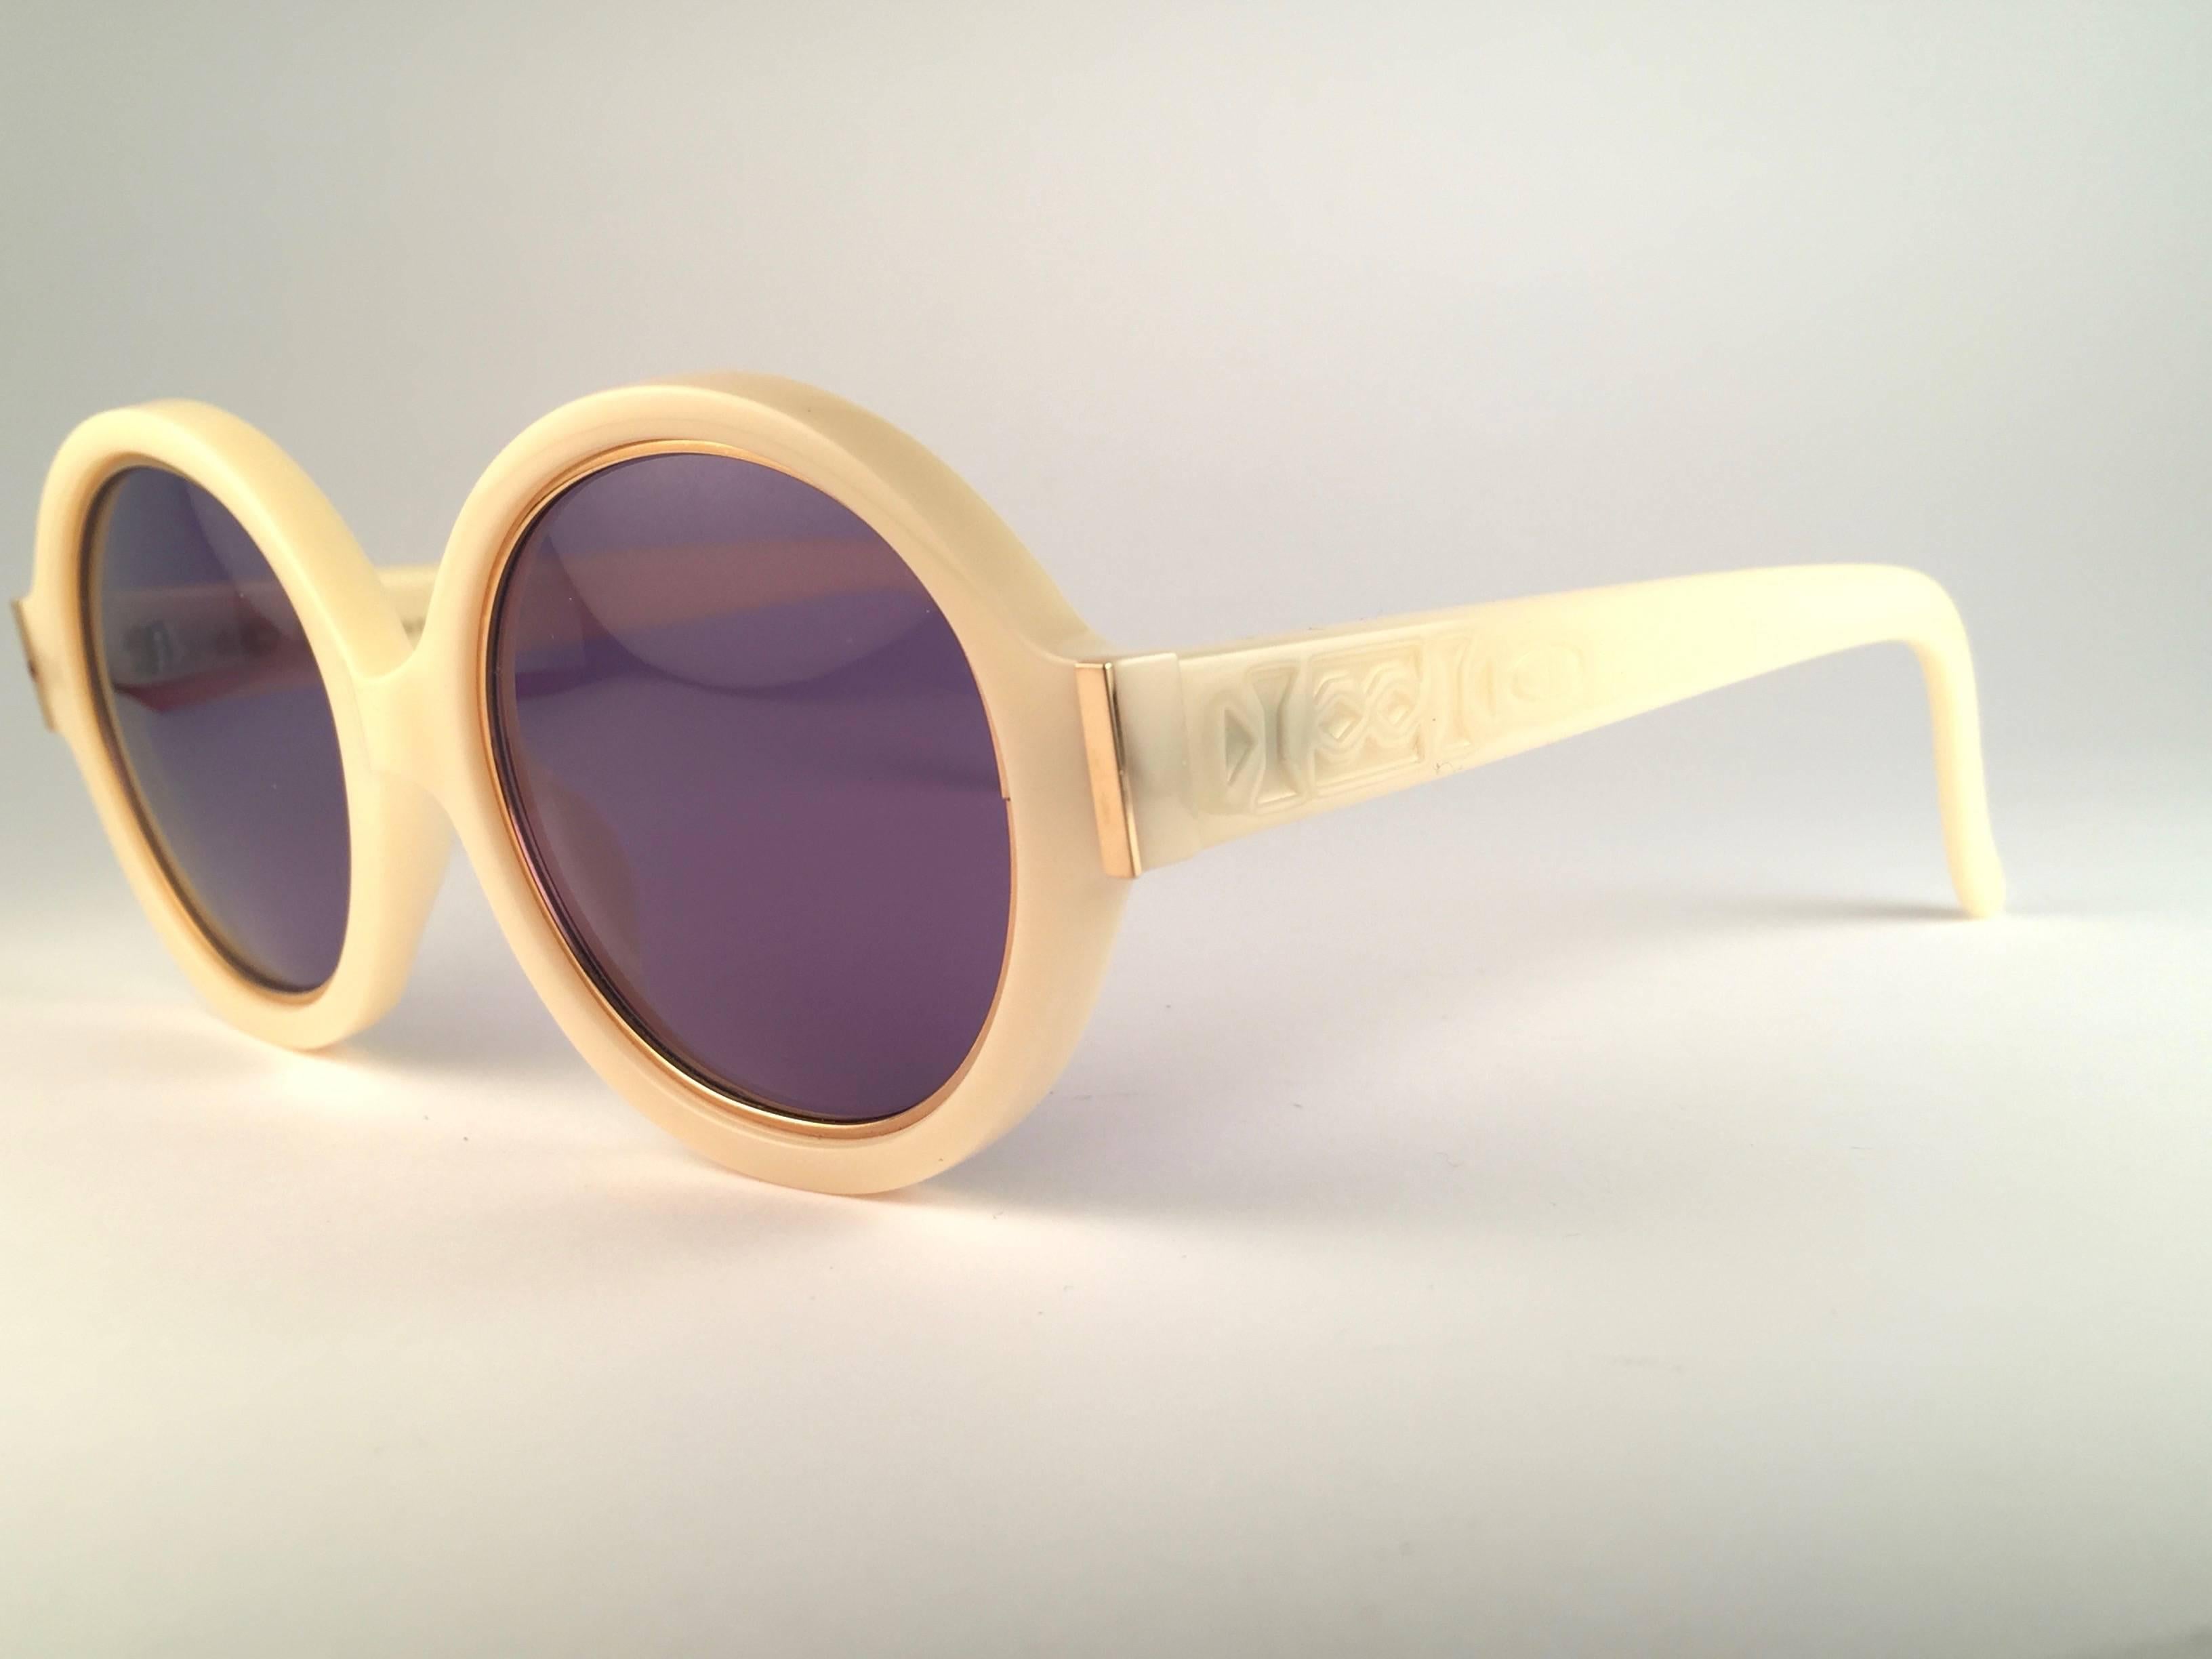 Vintage Christian Dior 2446 70 Beige Round Optyl Sunglasses In Excellent Condition For Sale In Baleares, Baleares